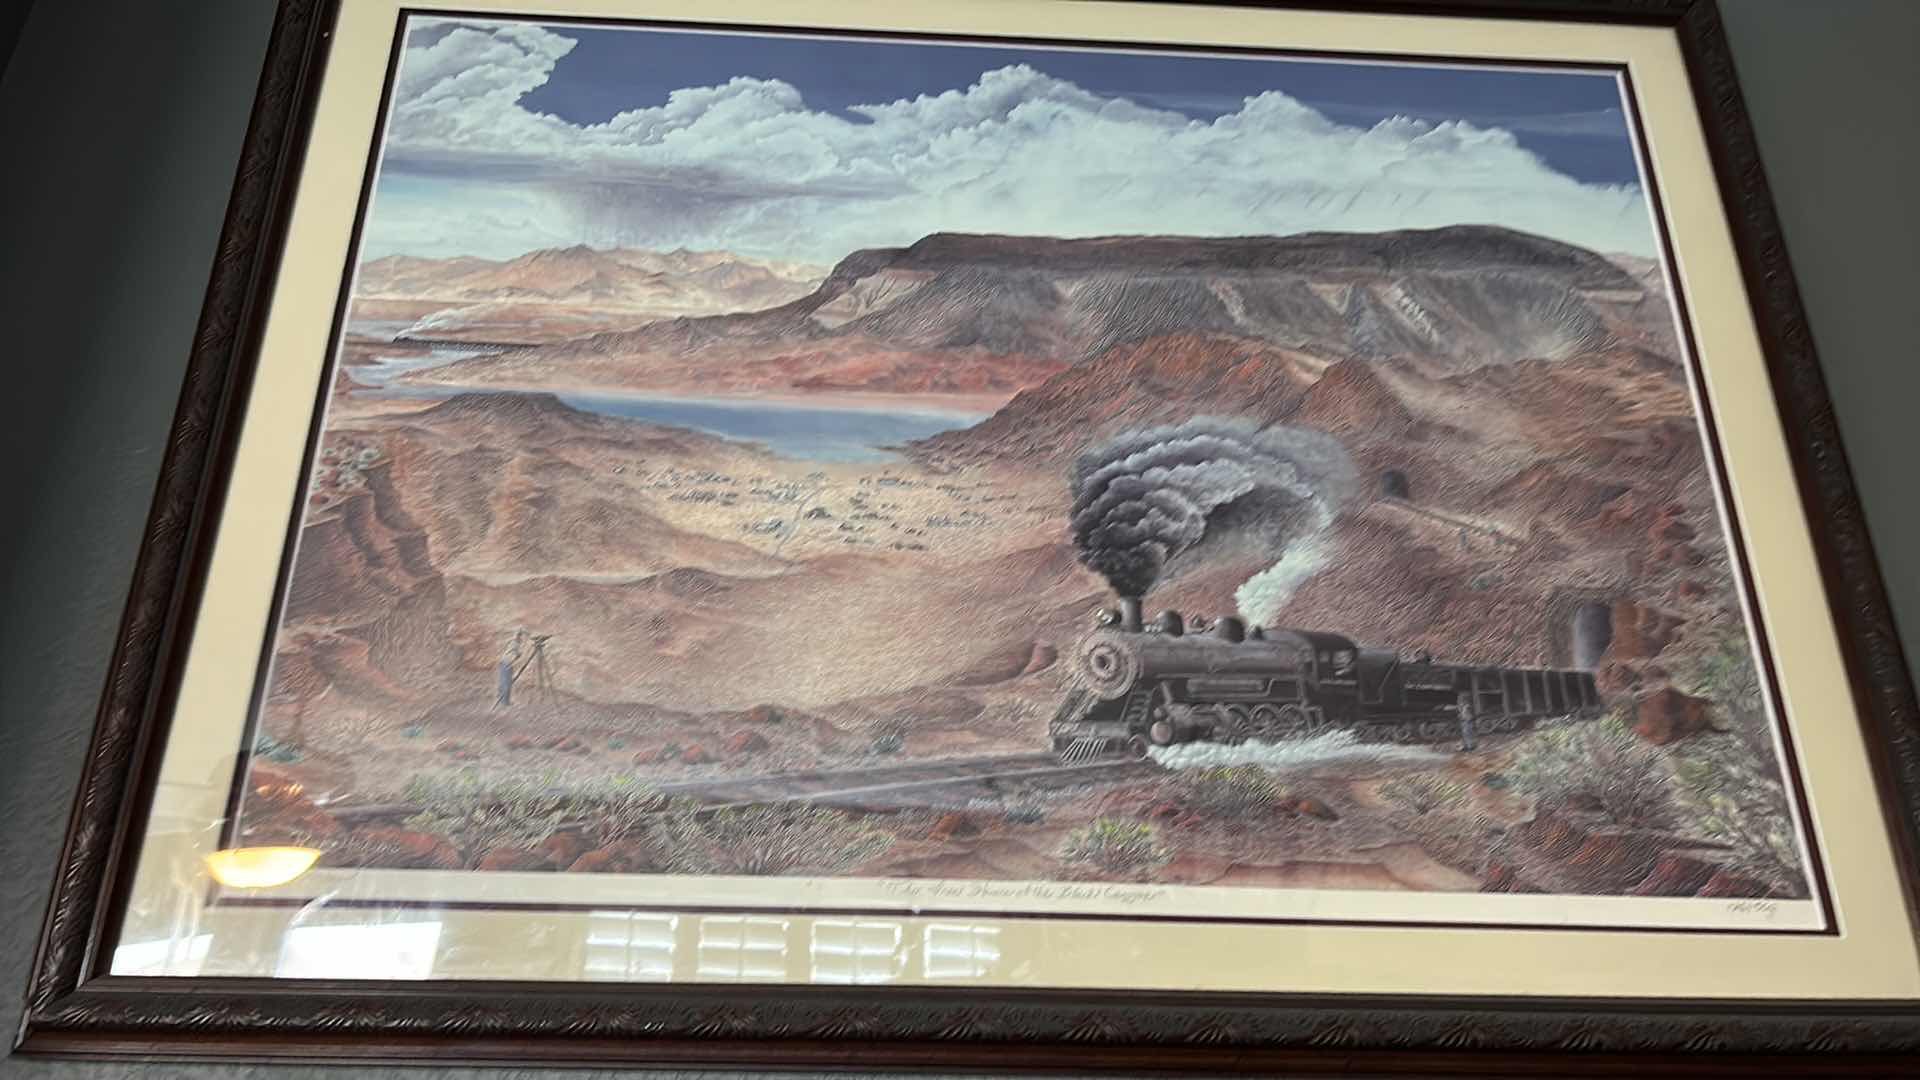 Photo 9 of WALL DECOR - SIGNED NUMBERED’ “THE IRON HORSES OF THE BLACK CANYON” FRAMED ARTWORK 43” x 32”